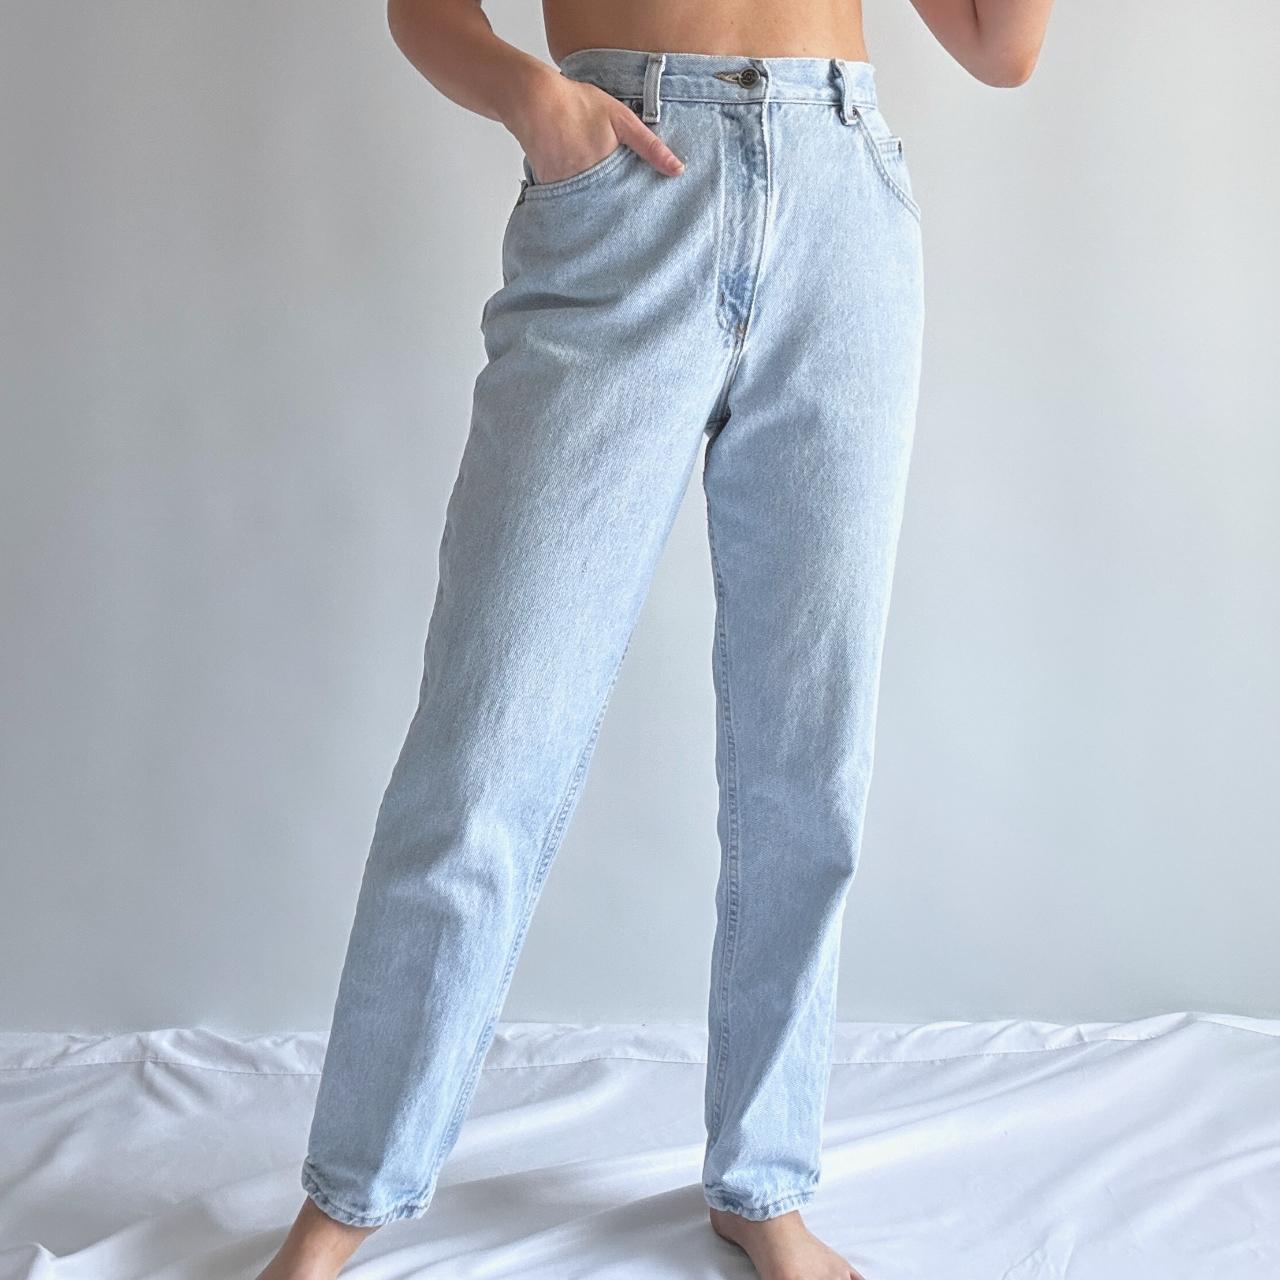 Vintage High Waisted Jeans (Size 29) Size 8, 29